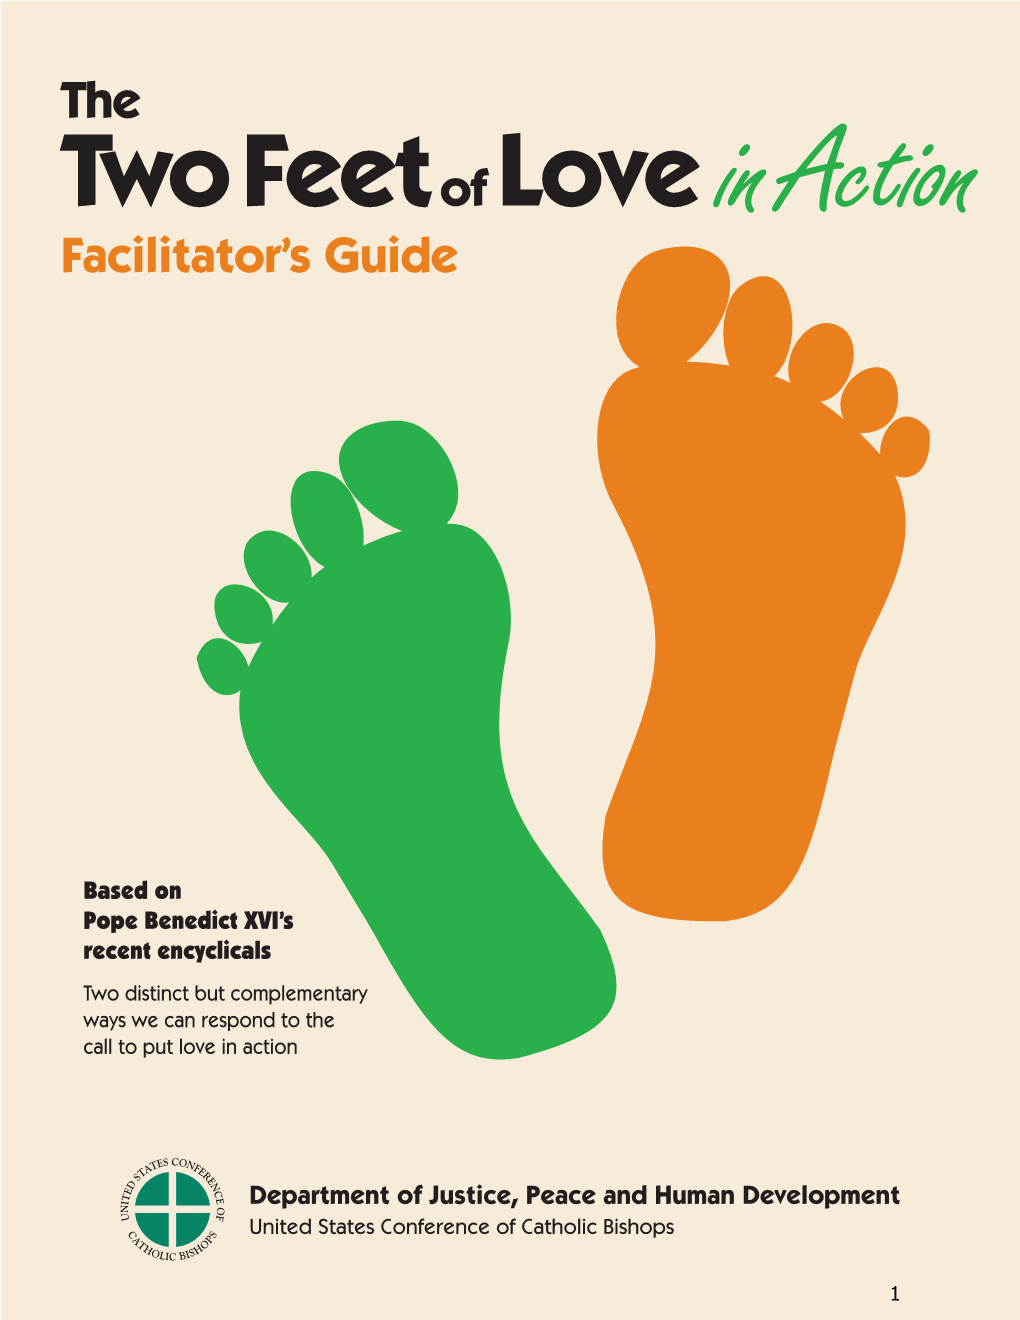 The Two Feet of Love in Action the First “Foot” Is Called Social Justice